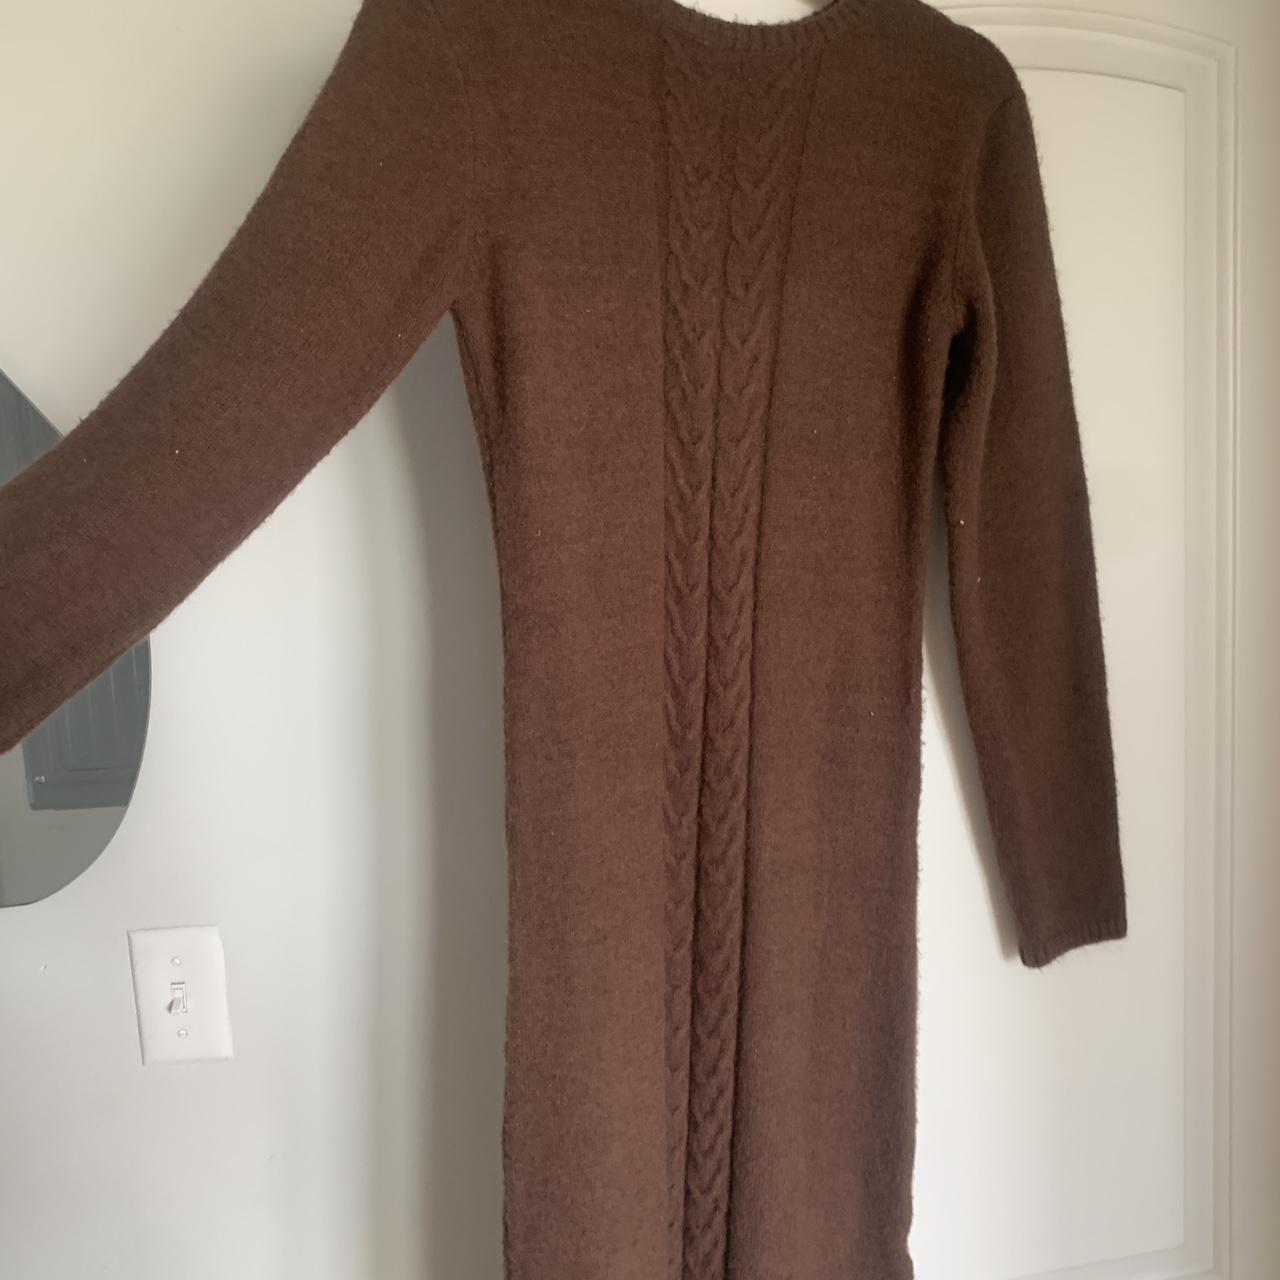 Native Youth Women's Brown Dress (2)